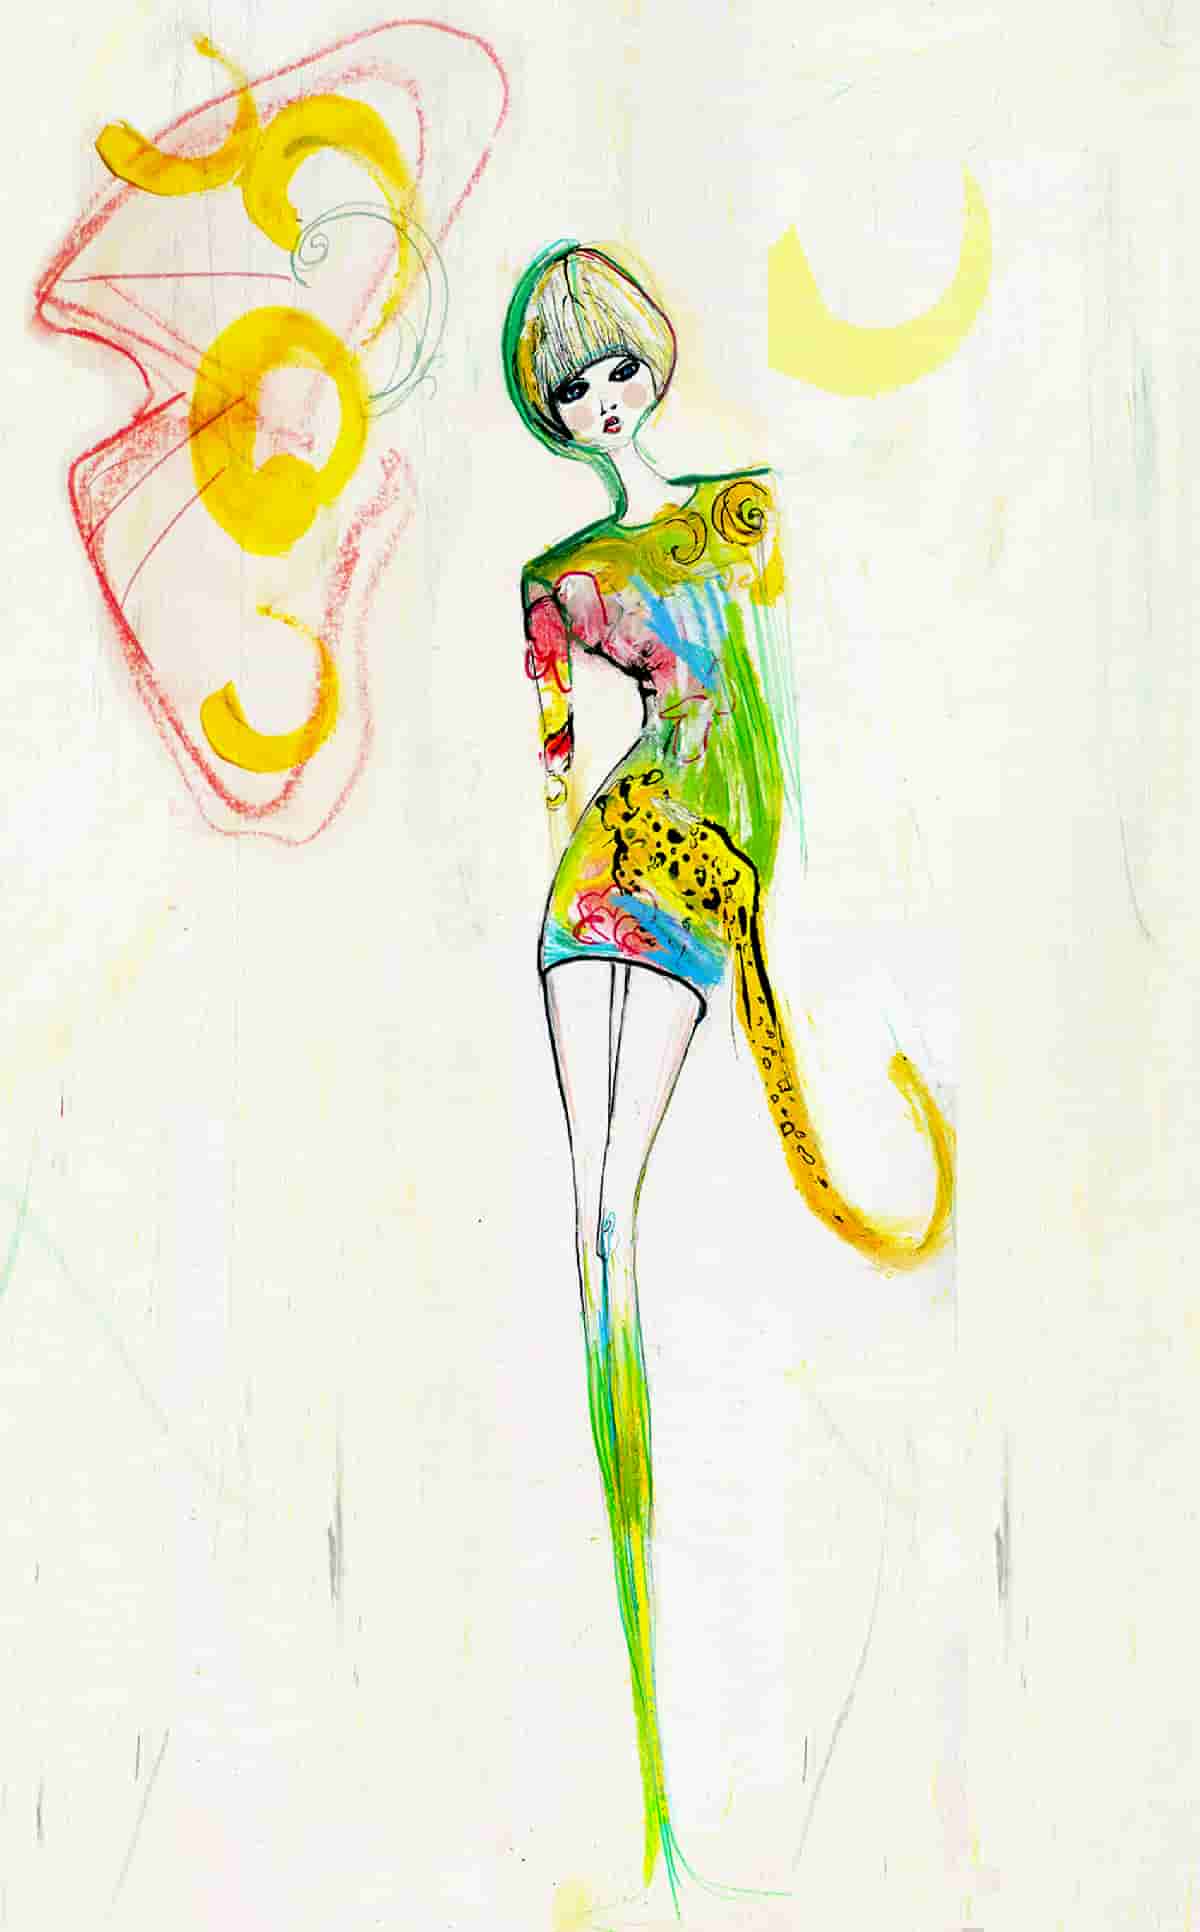 The Create Fashion Illustrations edited Draw Your Own Sketch in a Few Steps